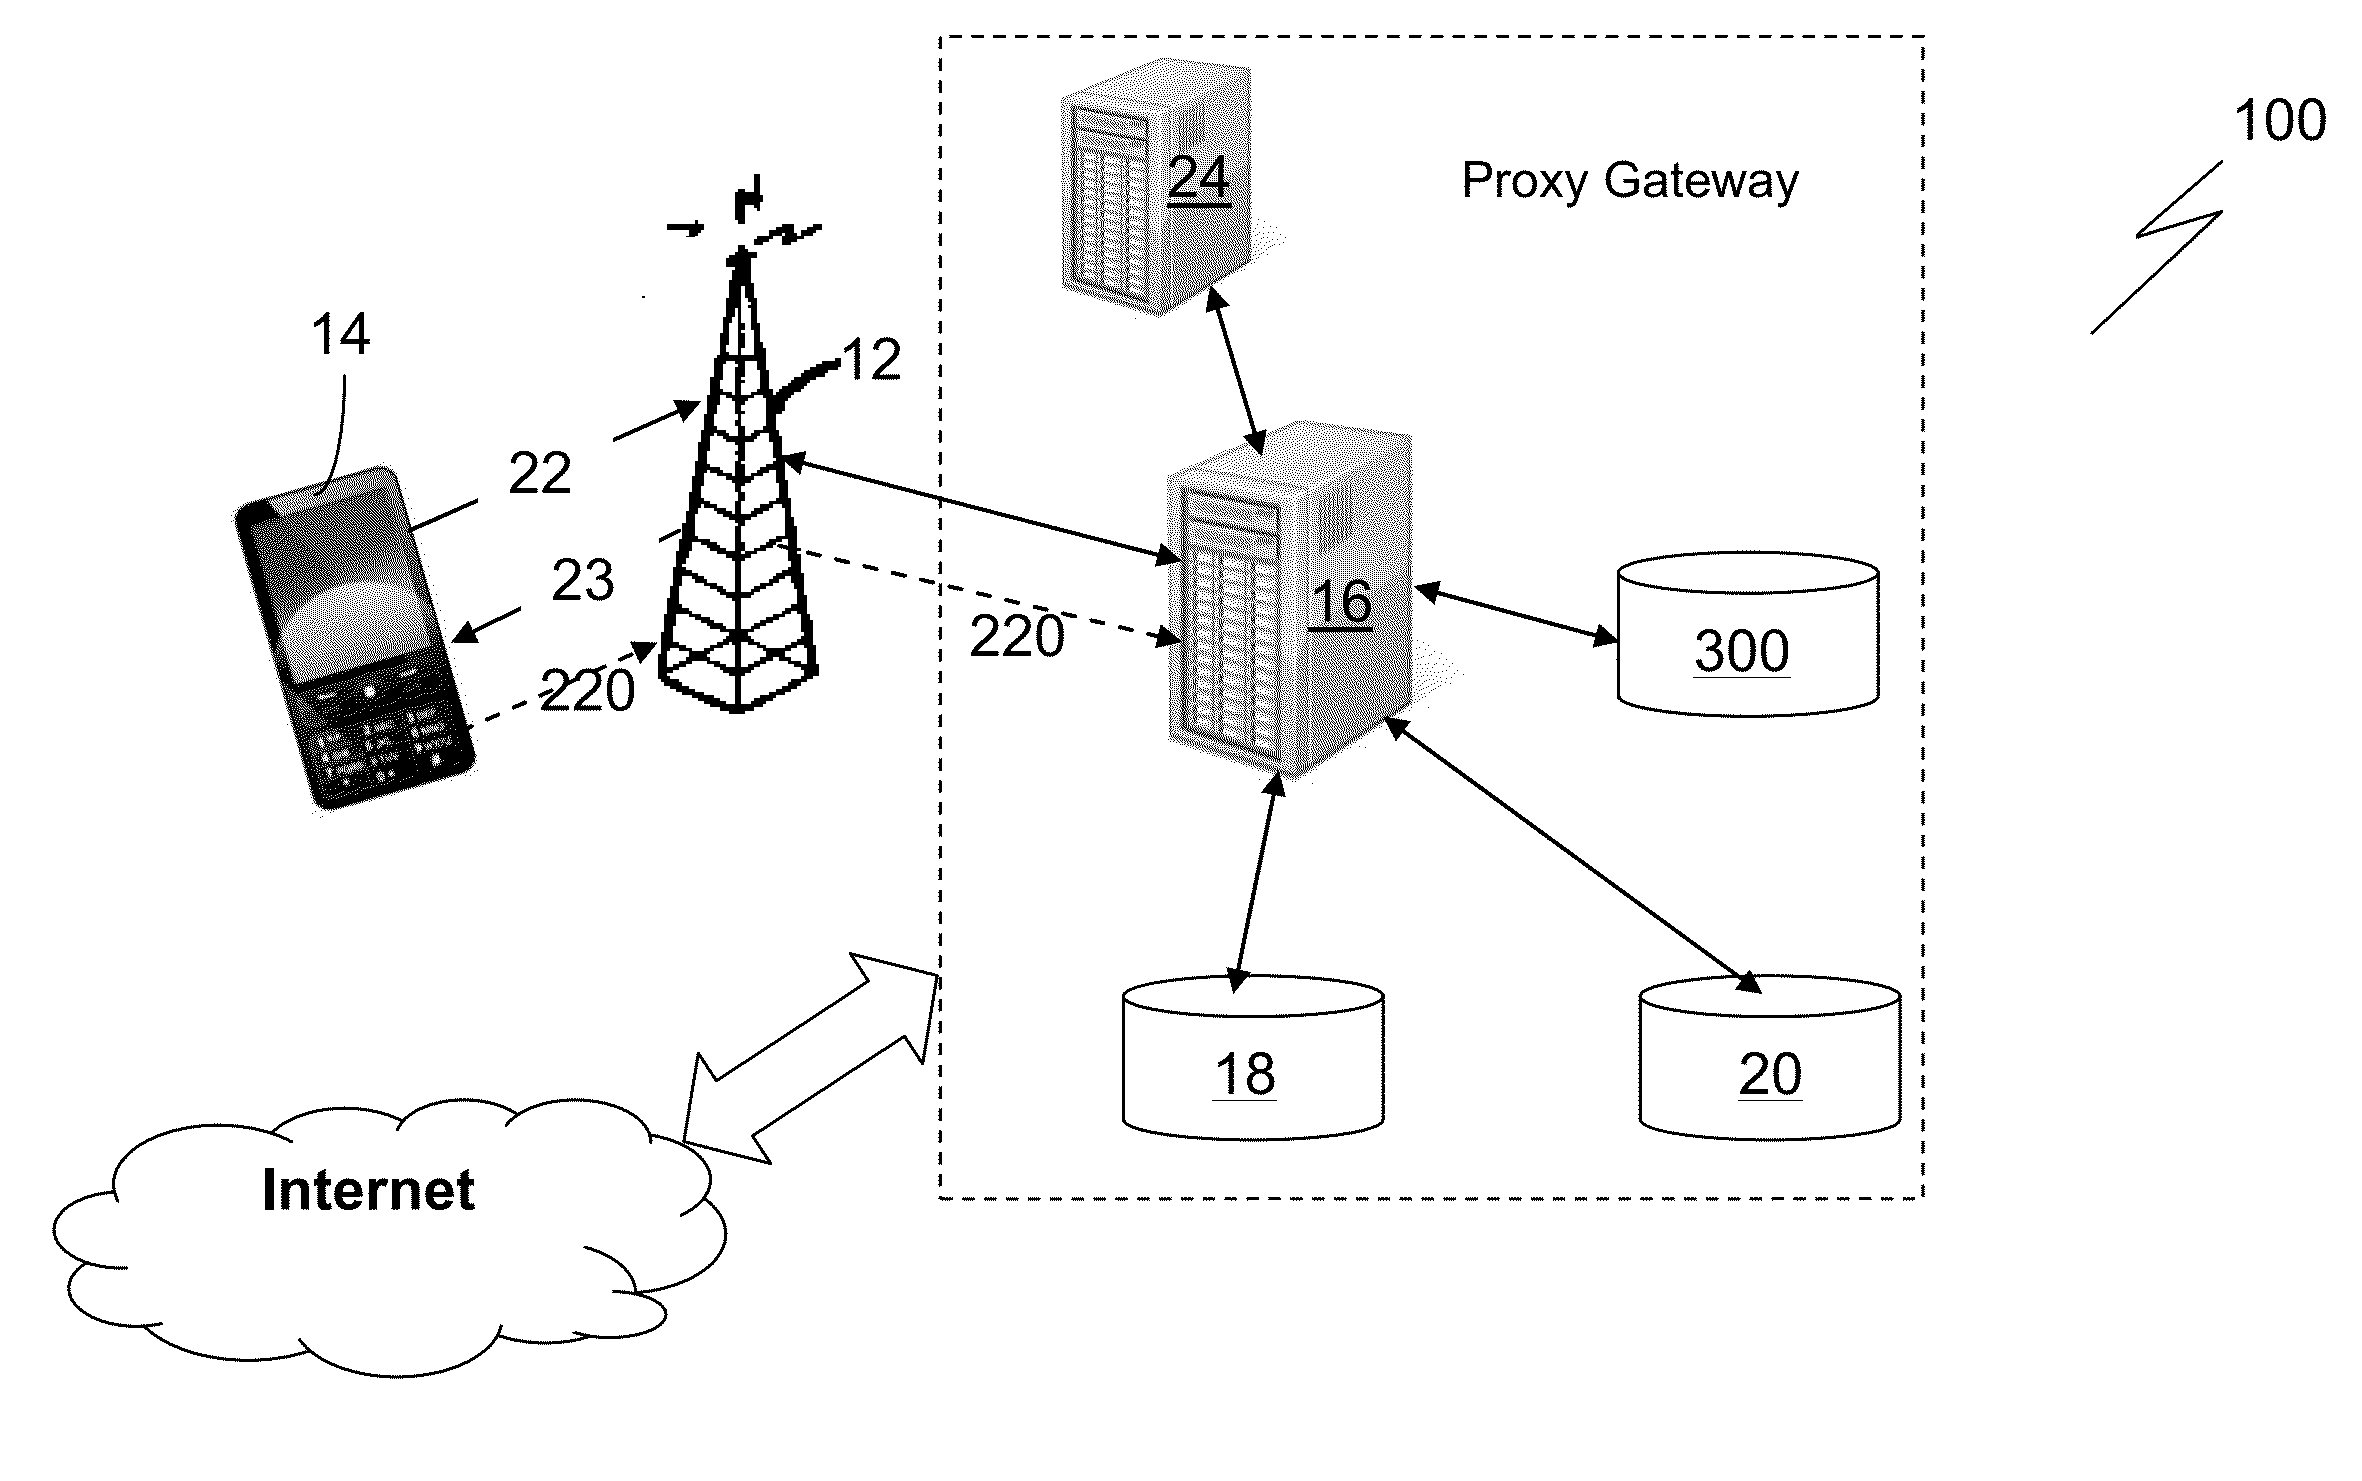 System and method for adjusting the amount of data bandwidth provided to a mobile device